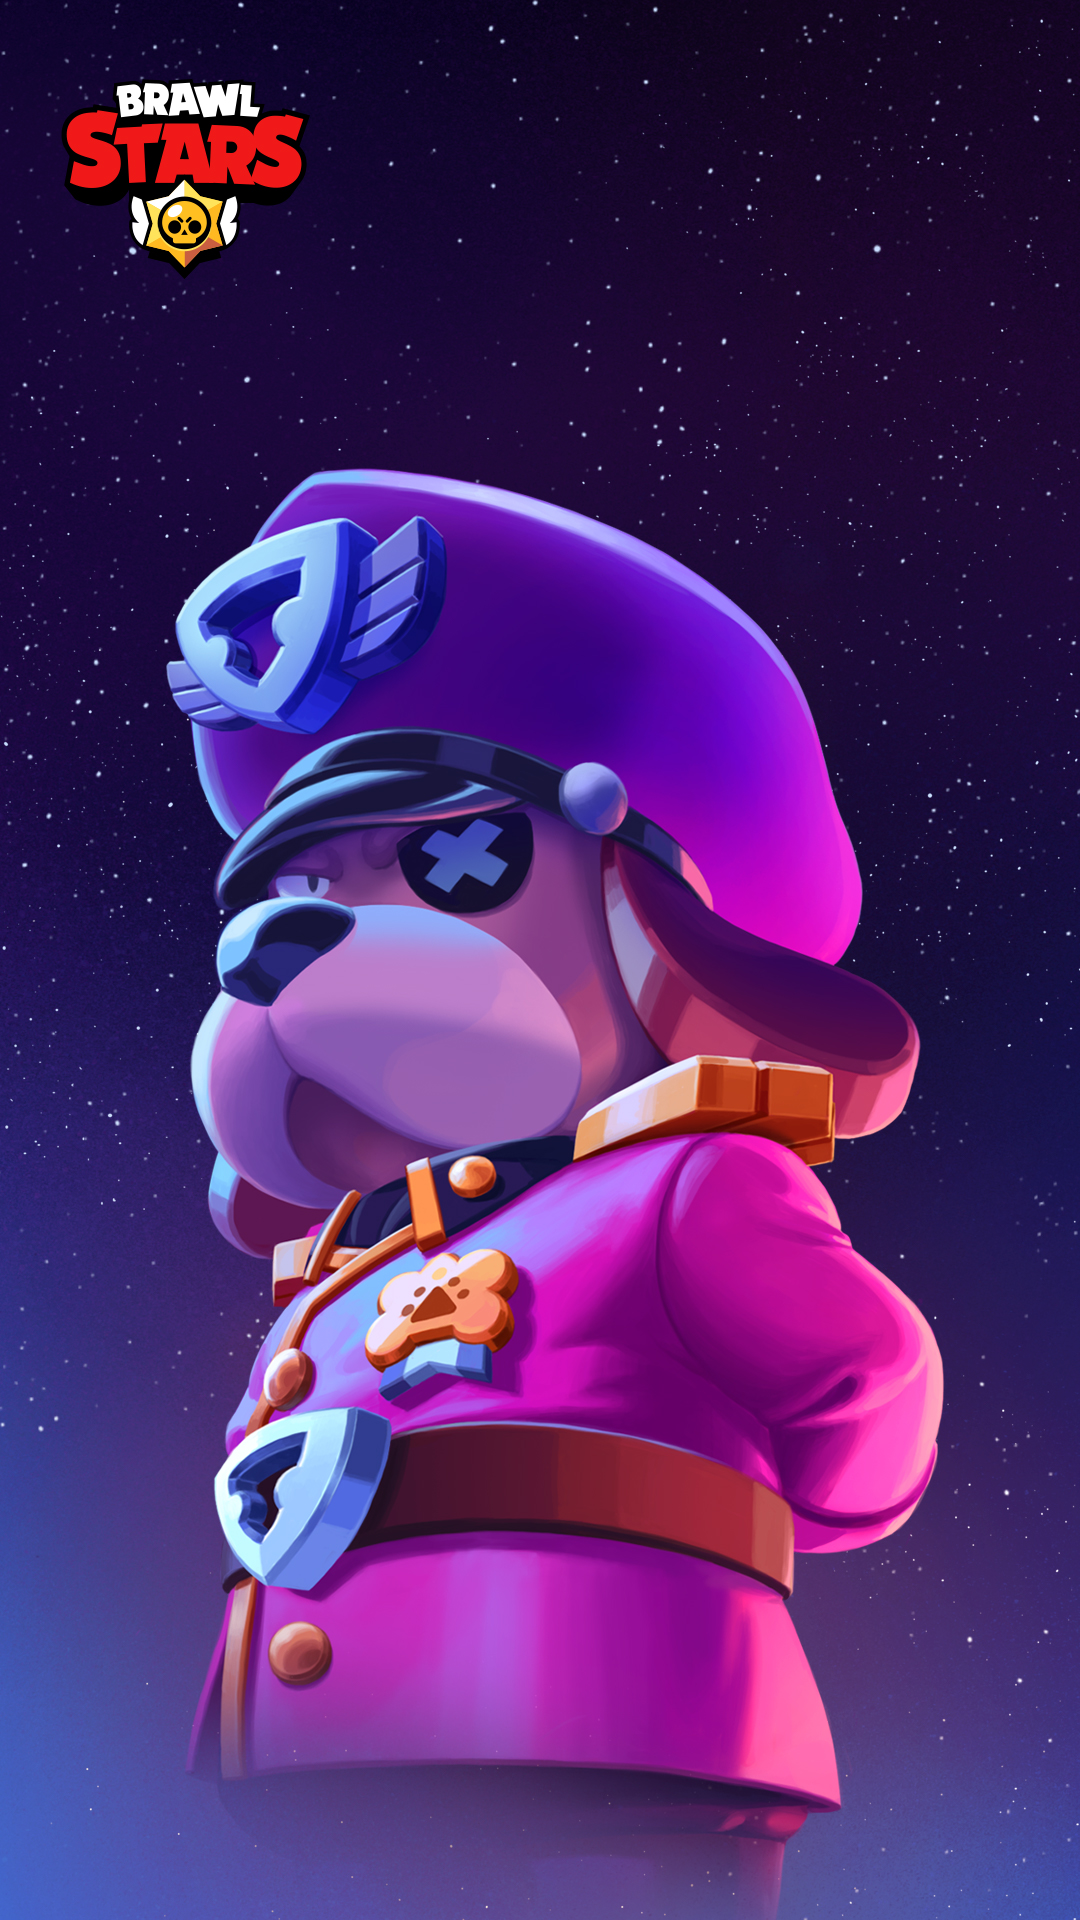 Brawl Stars On Twitter Look For The Starrforce Hashtag On Youtube For More Content About The Upcoming Update And Tell Us Your Thoughts Https T Co 2ulflimqev - imagenes de brawl stars todos los personajes